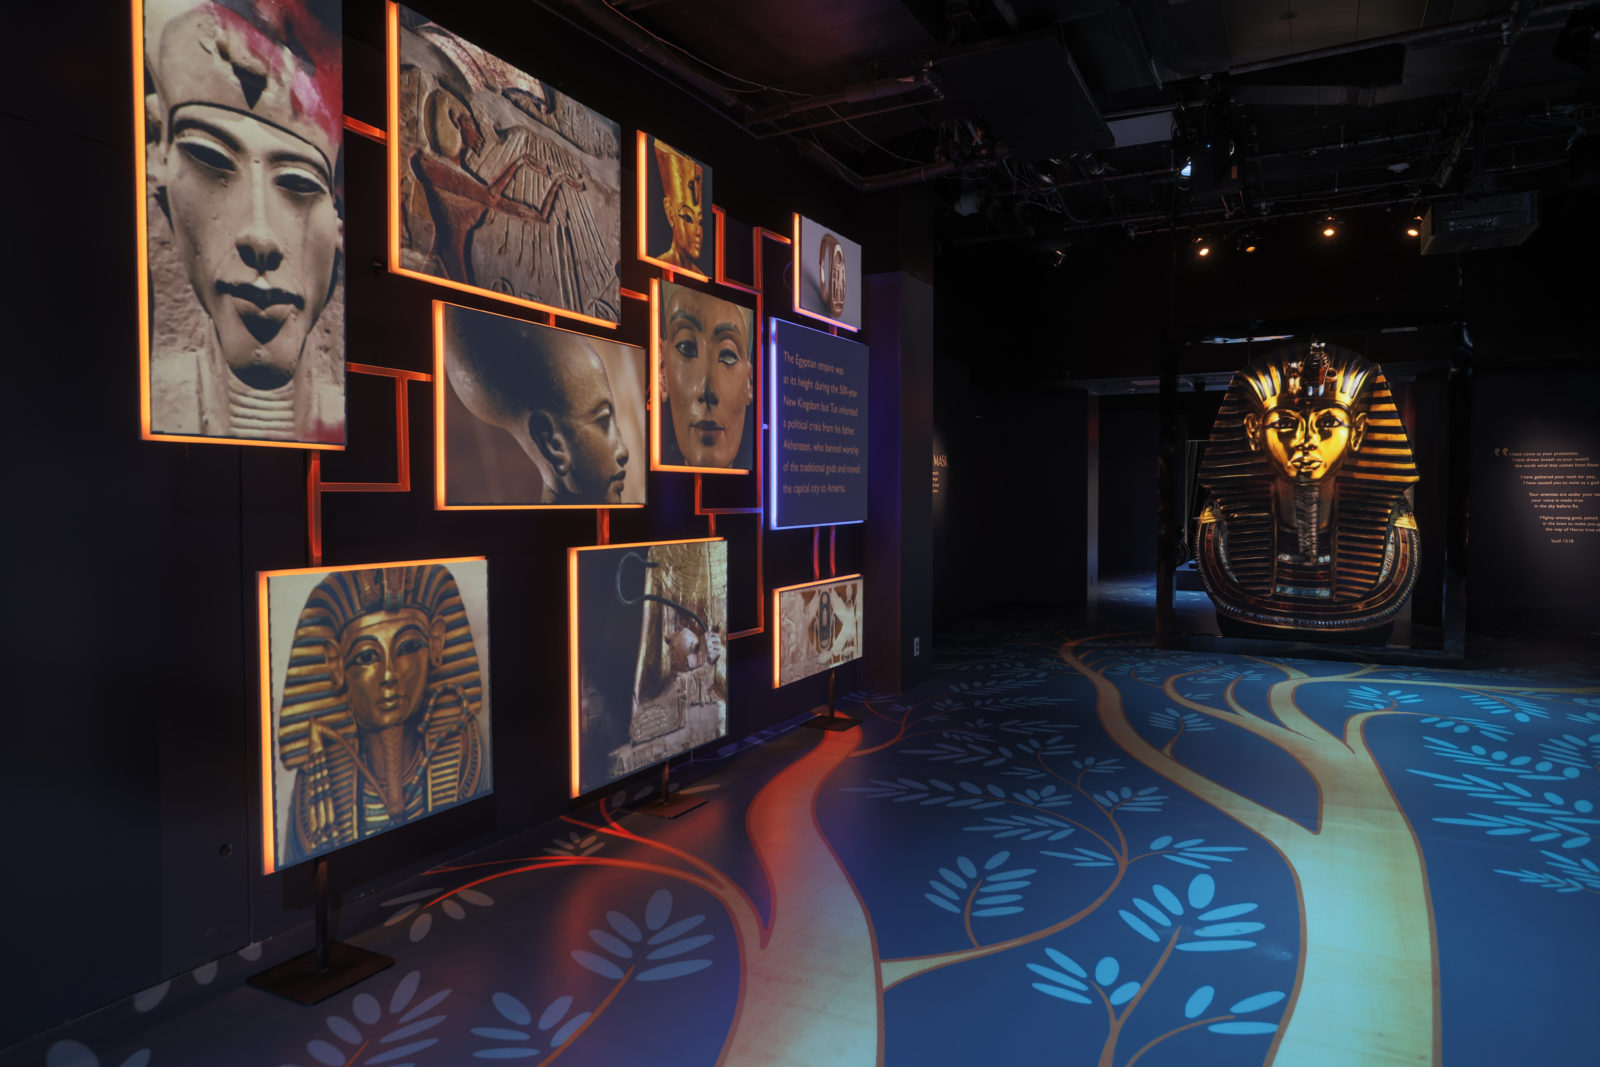 King Tut immersive experience exhibit at NG HQ in Washington DC.